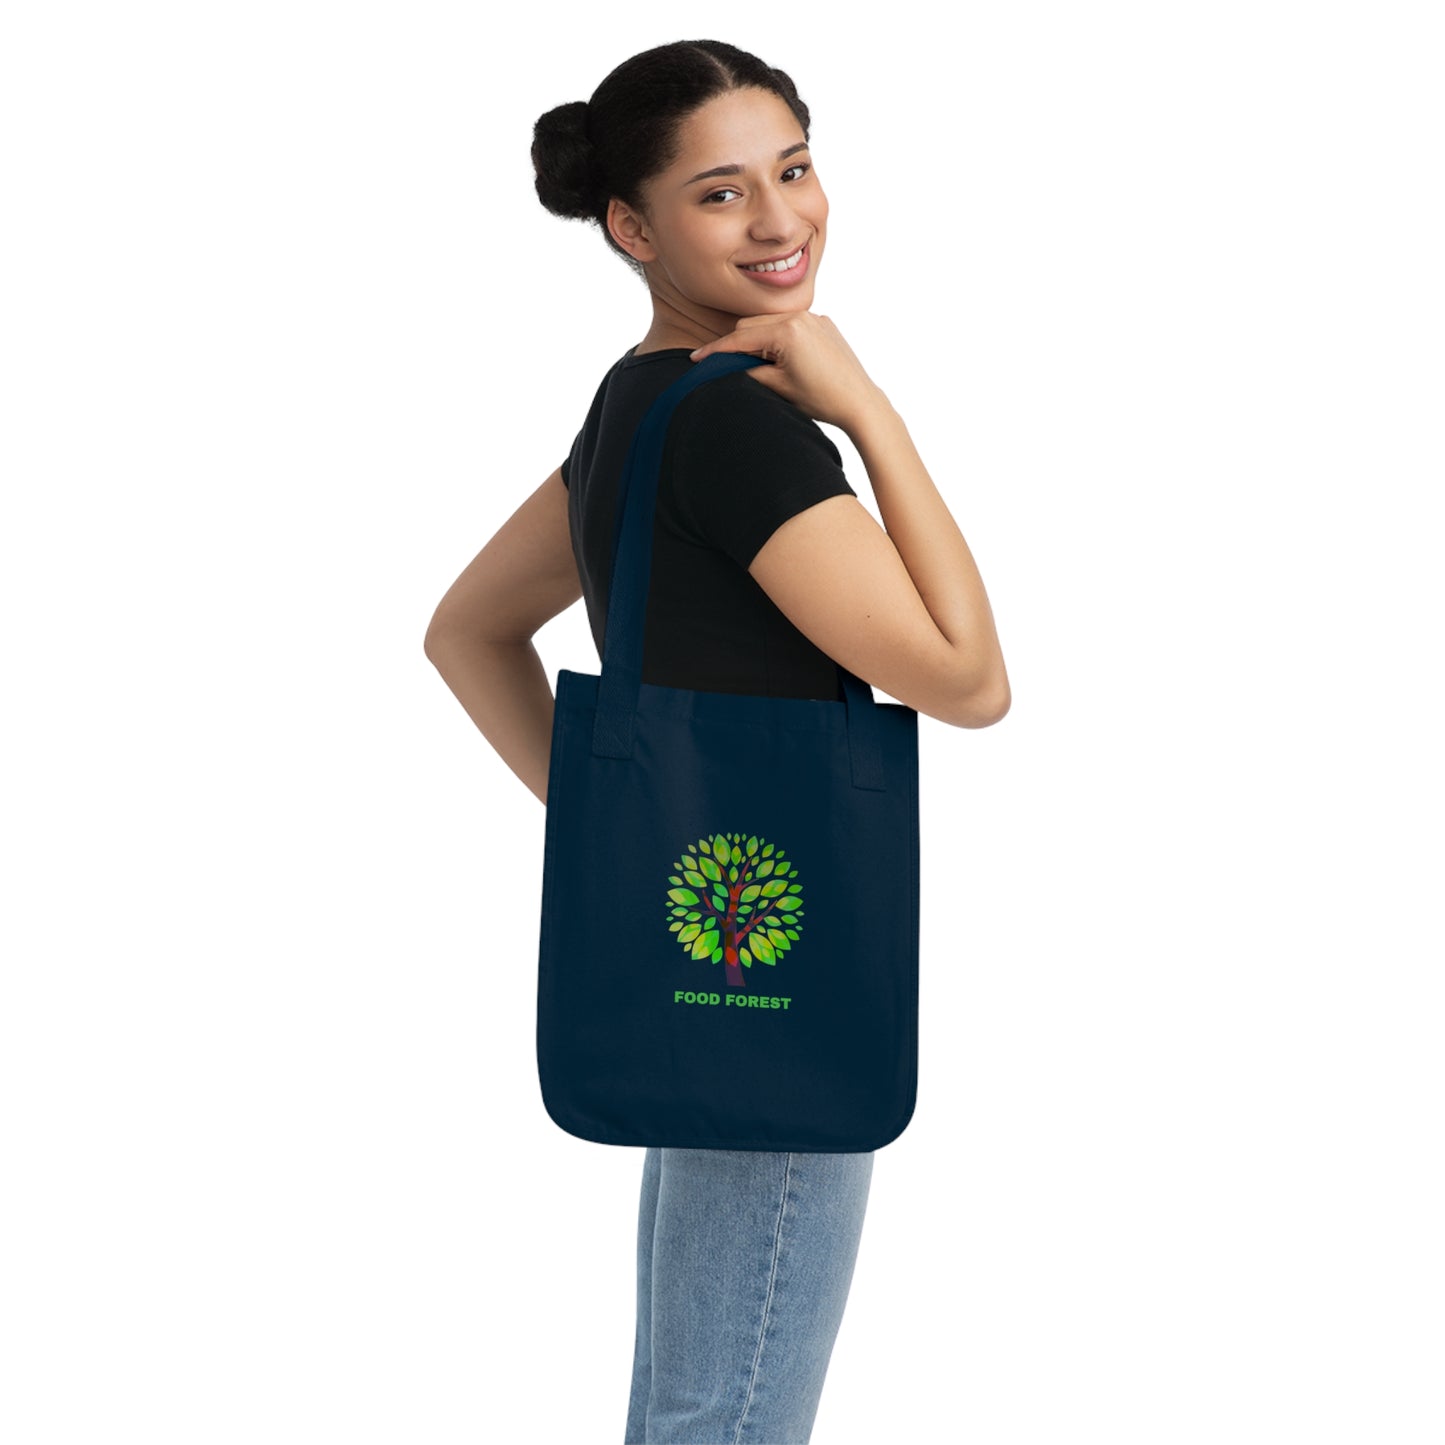 FOOD FOREST Organic Canvas Tote Bag